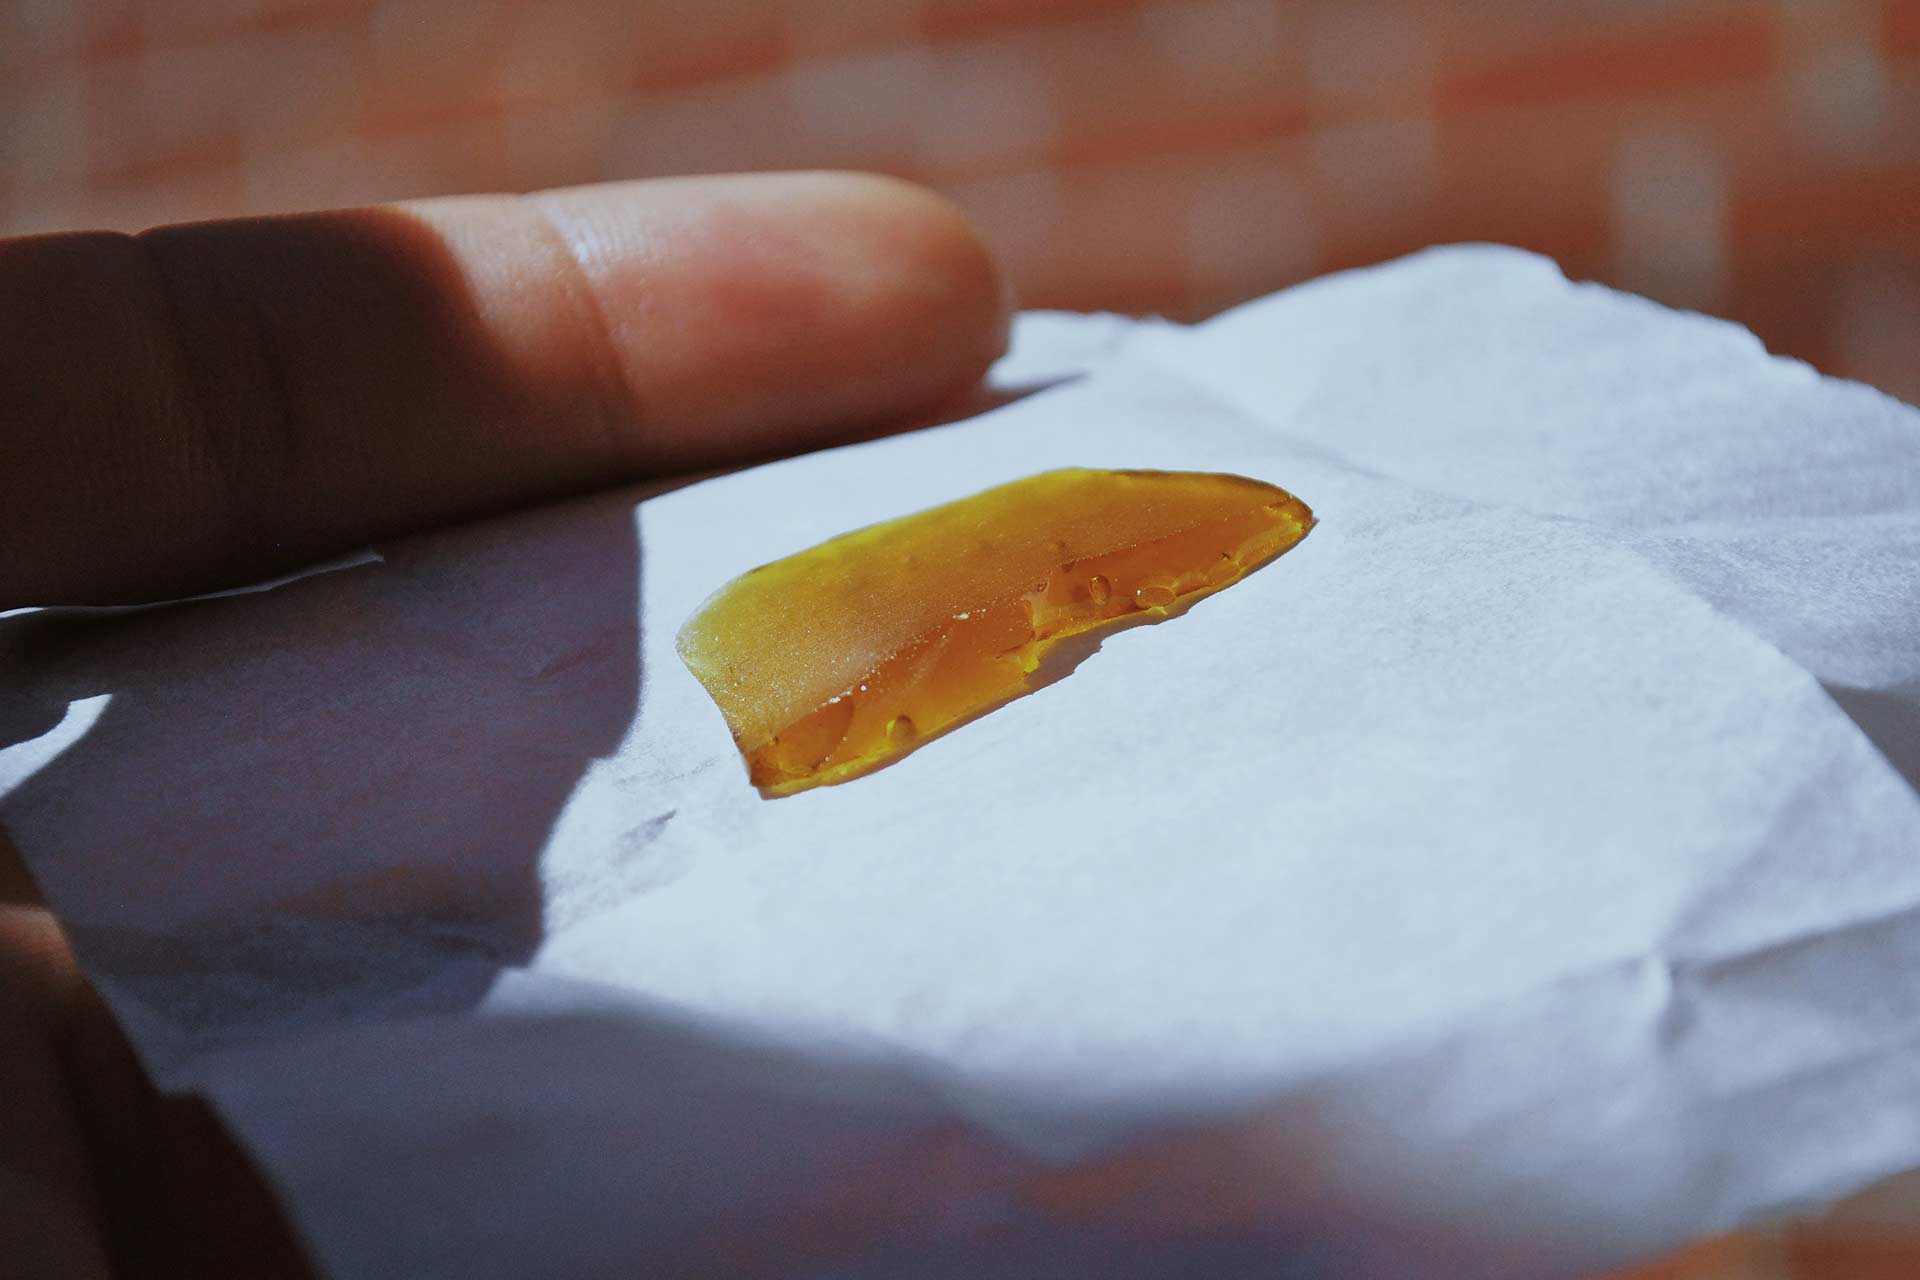 Shatter example